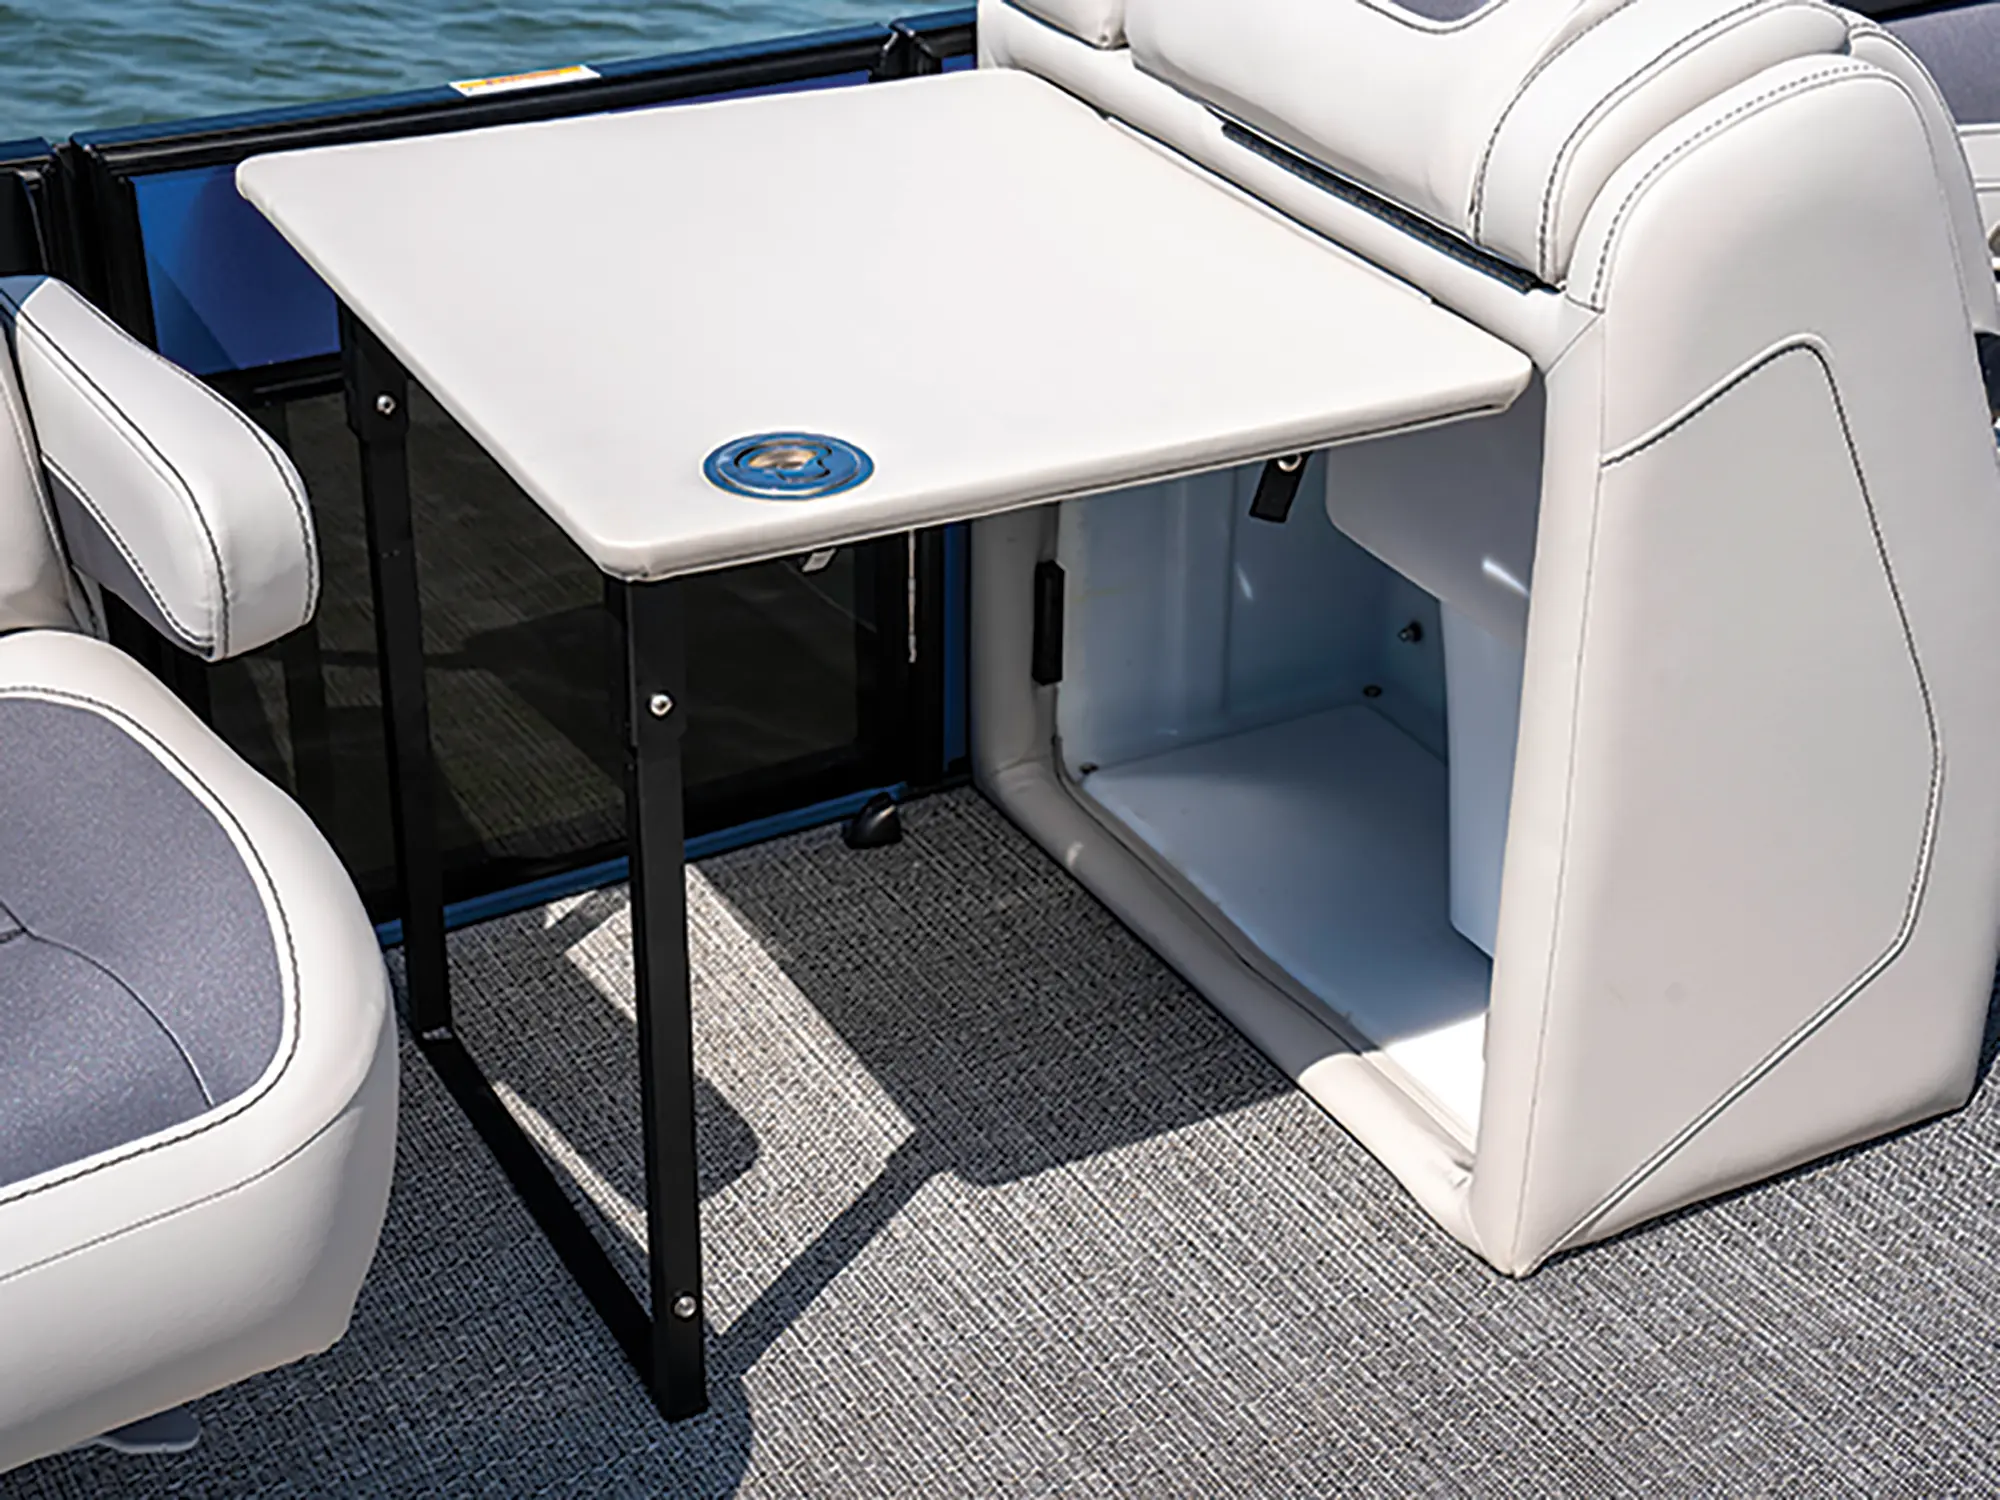 Landscape close-up photograph view of a small table sliding out deck located inside the Barletta Cabrio C22UC pontoon motorboat vehicle